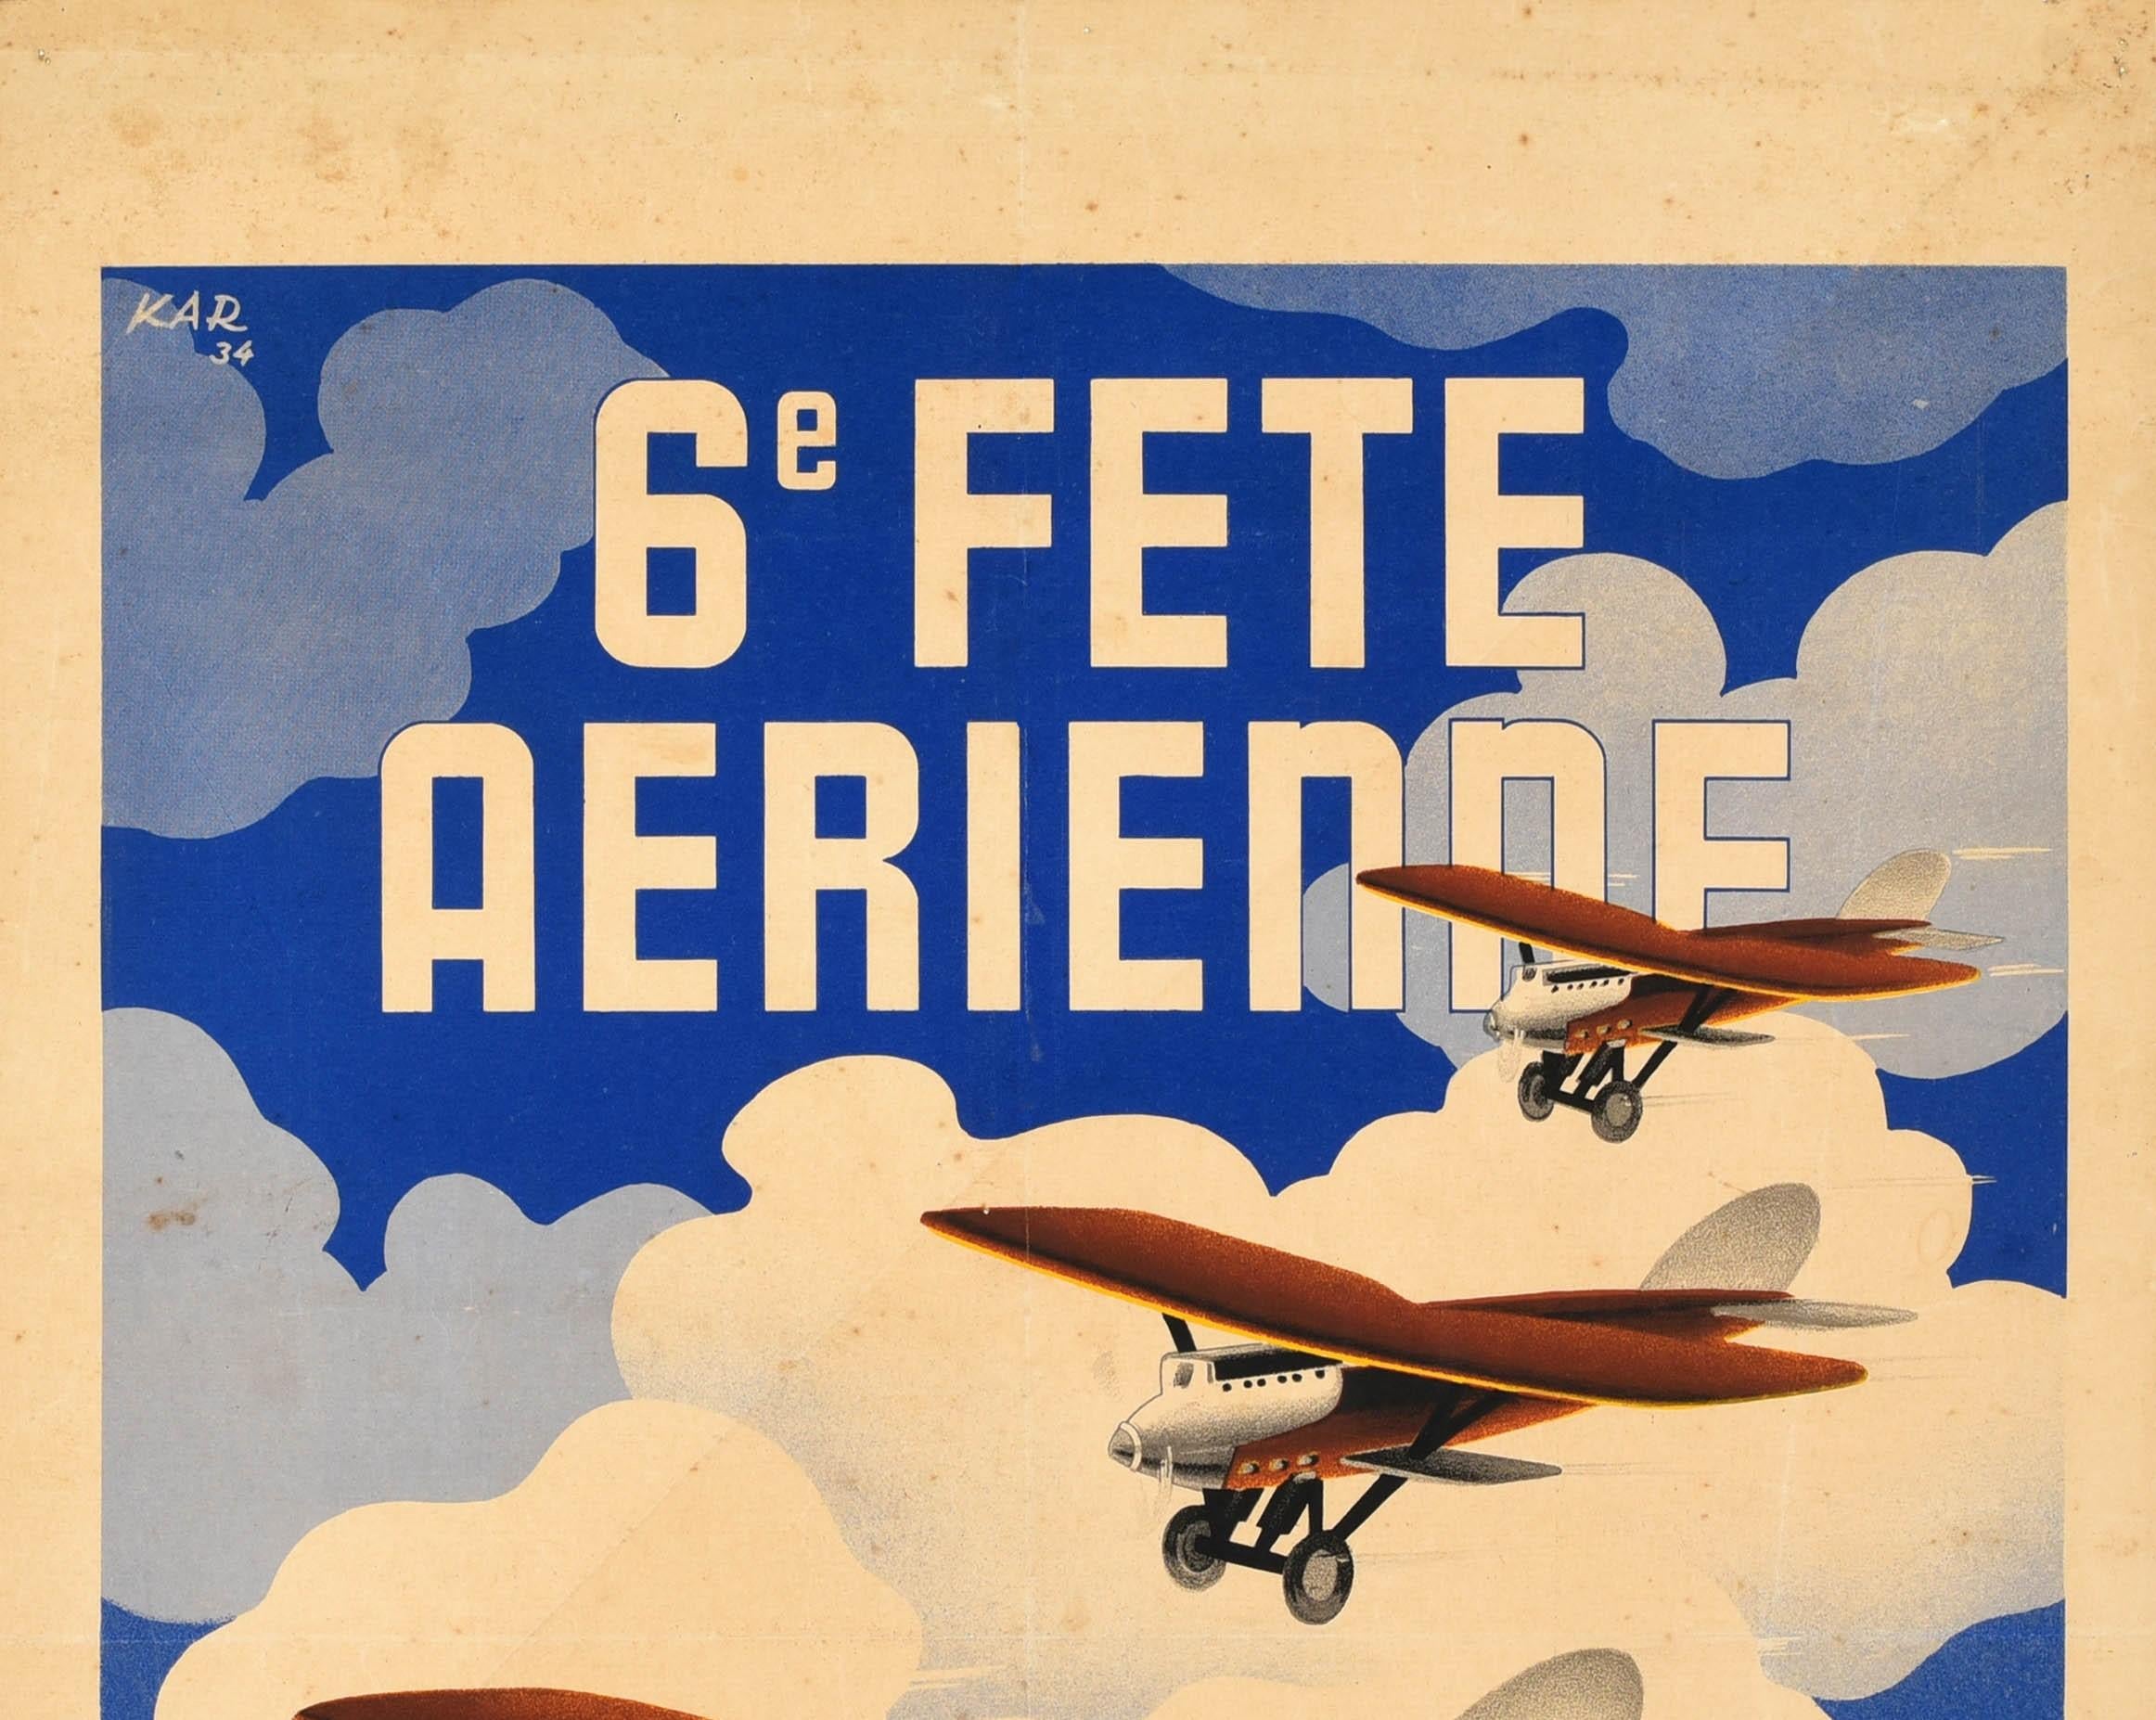 Original vintage aviation sport poster advertising the 6e Fete Aerienne / 6th Air Festival at Vincennes Paris on 20-21 May 1934. Great design depicting three propeller planes flying in formation in front of a cloudy sky background, the bold text